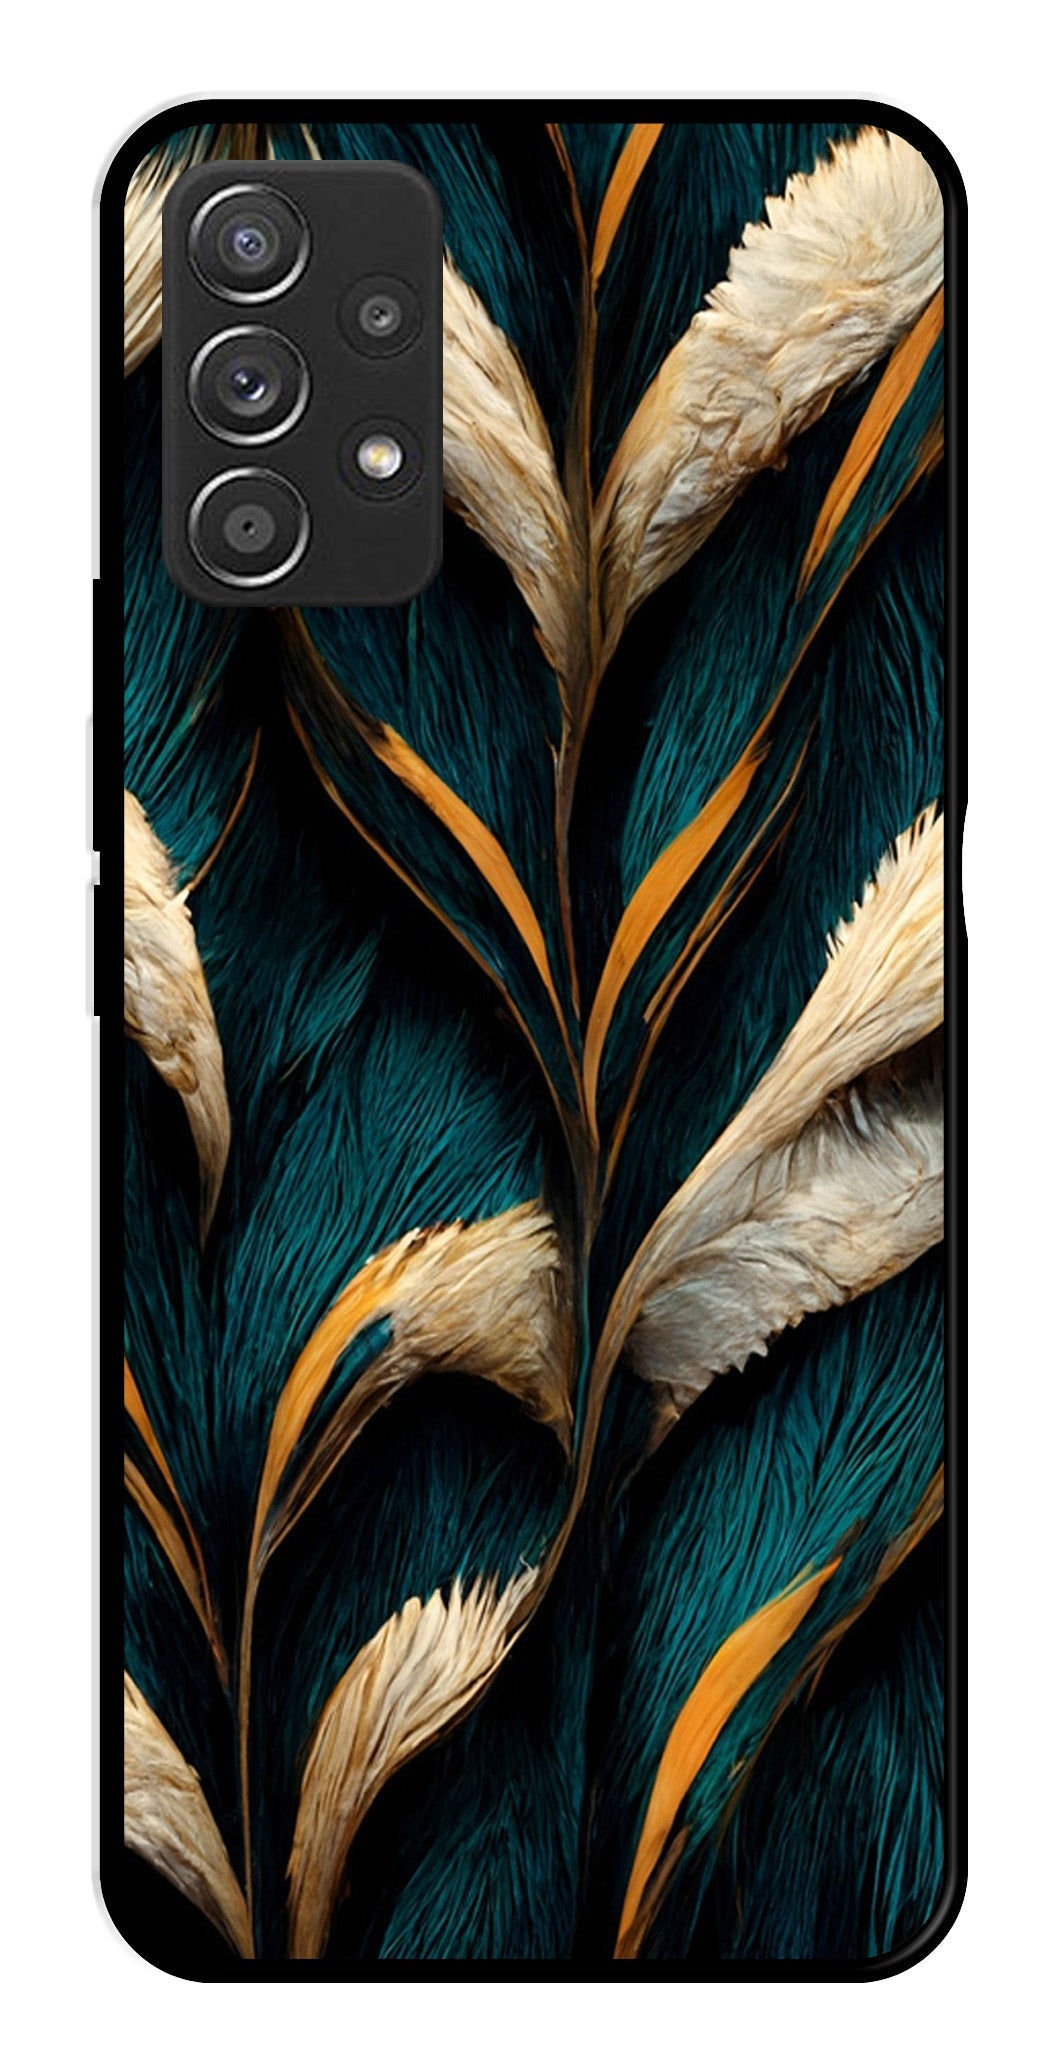 Feathers Metal Mobile Case for Samsung Galaxy A52 4G   (Design No -30)